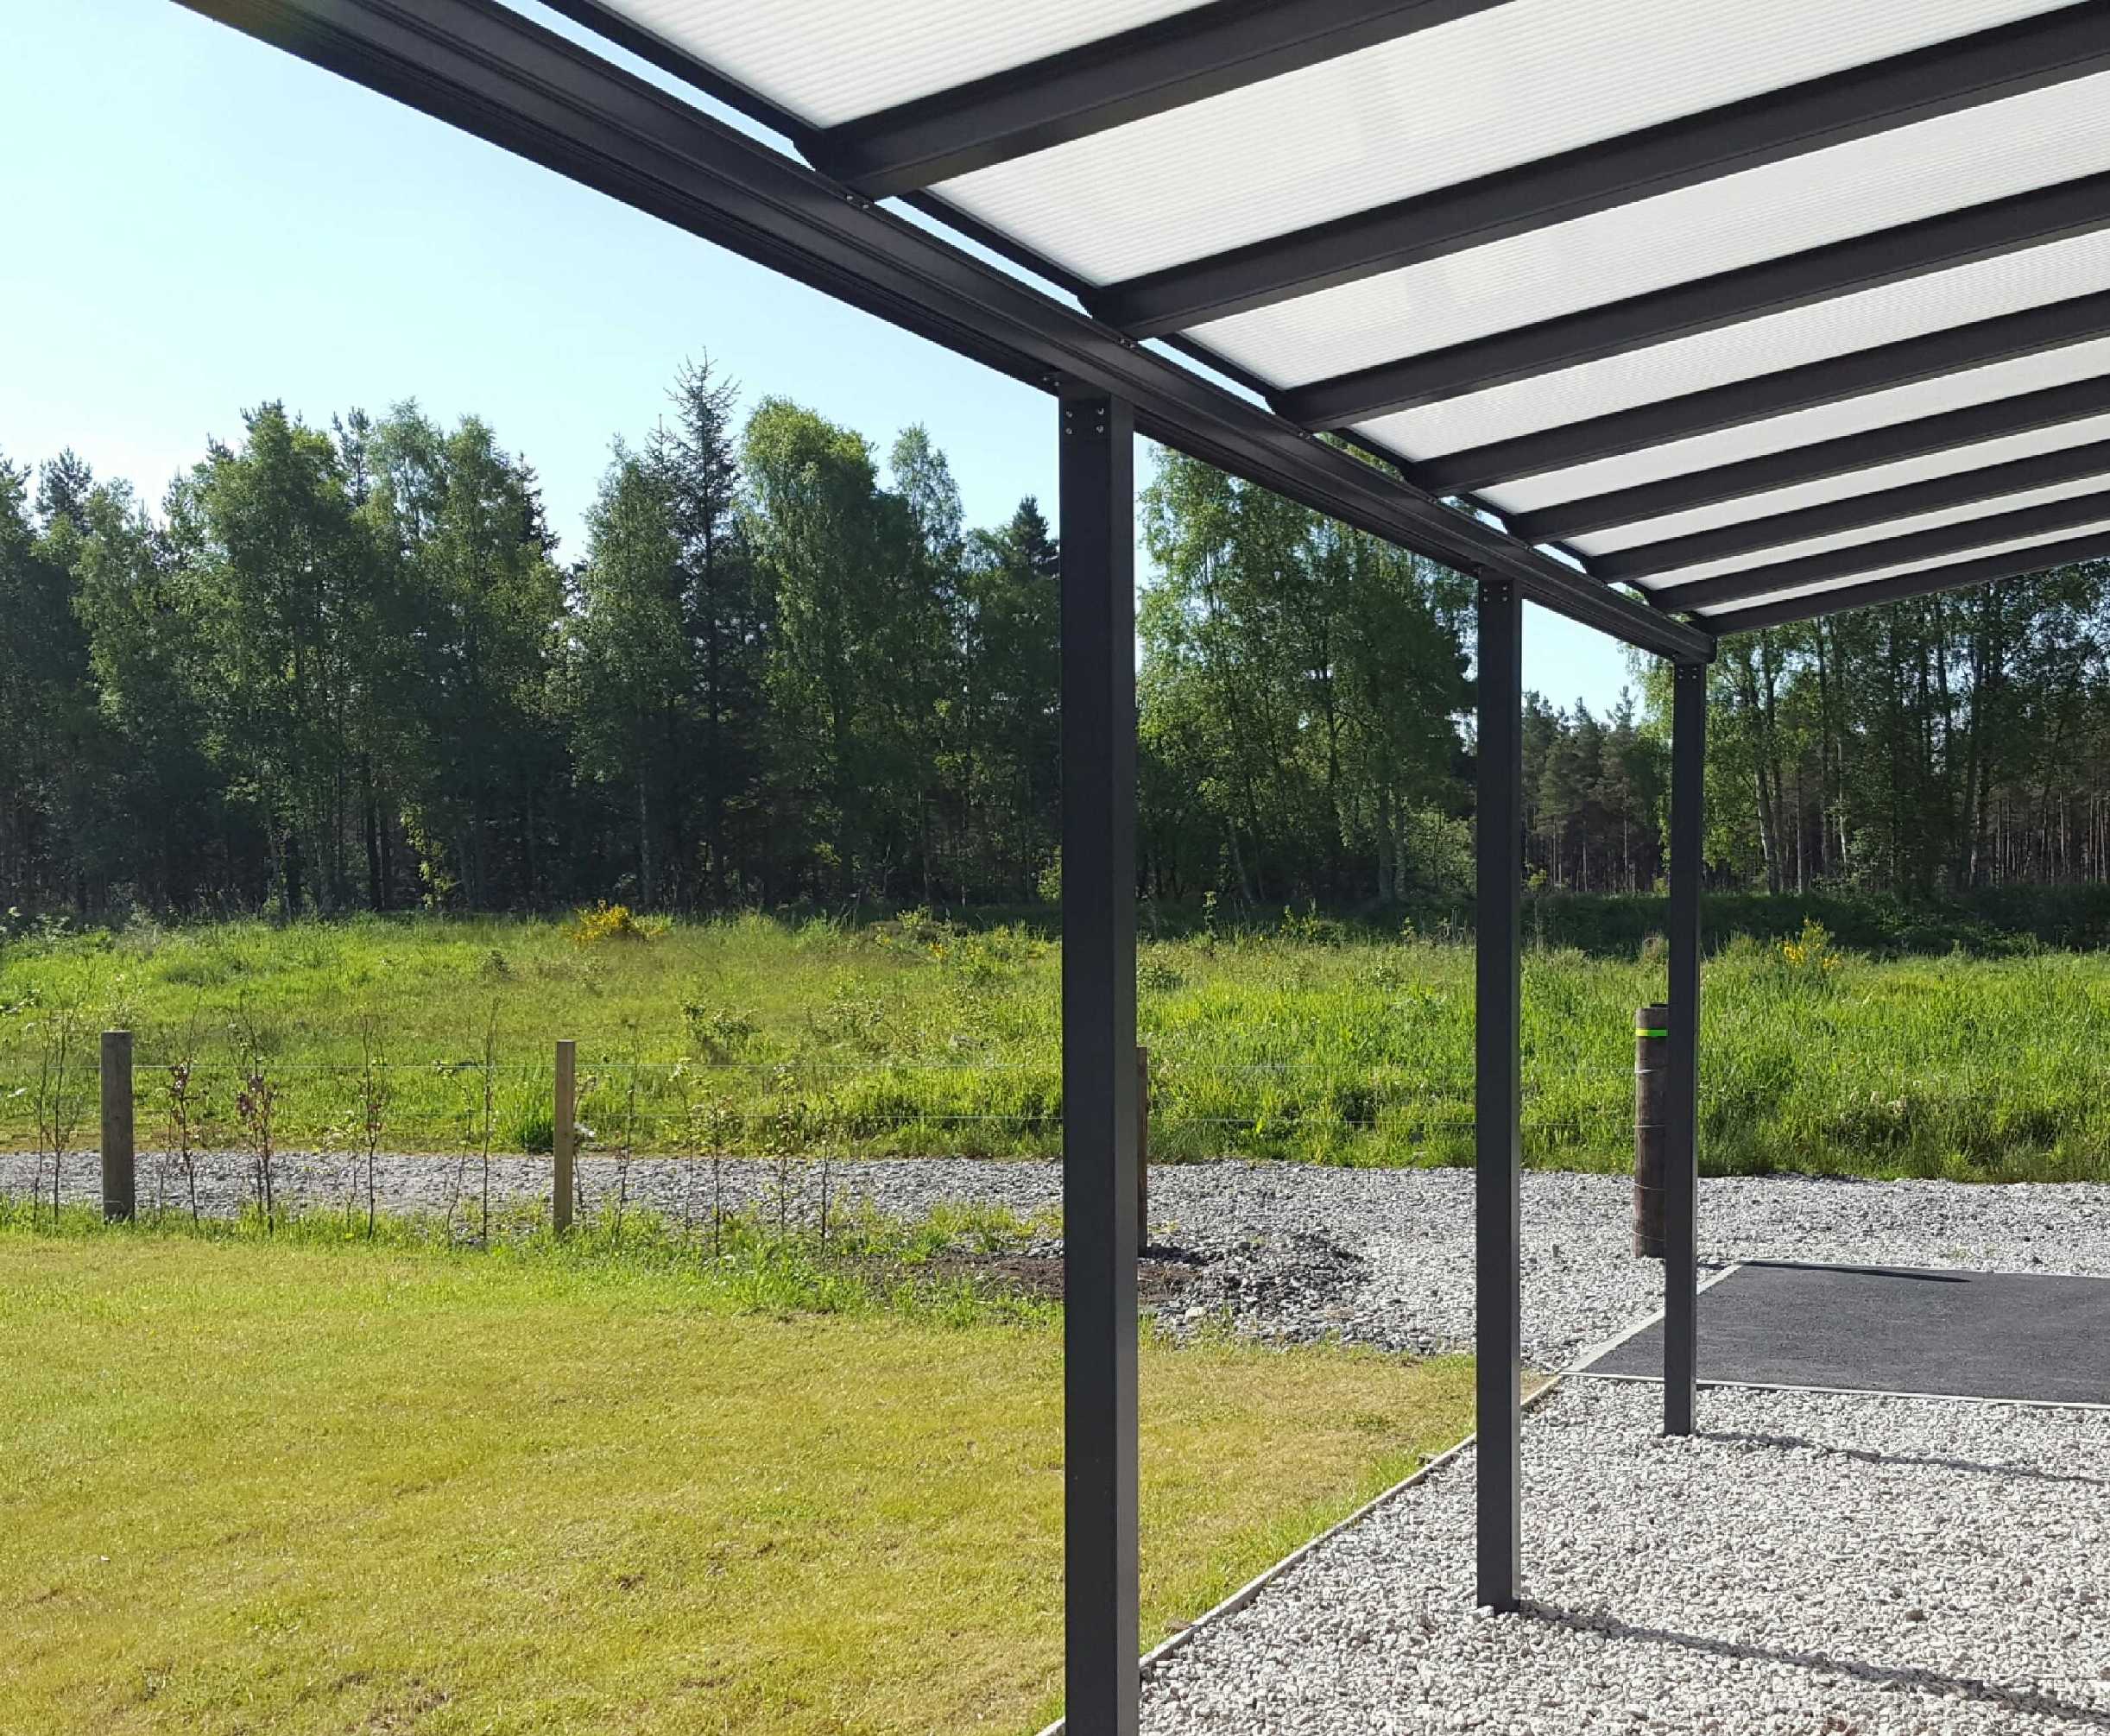 Omega Smart Lean-To Canopy, Anthracite Grey, 6mm Glass Clear Plate Polycarbonate Glazing - 5.2m (W) x 4.0m (P), (3) Supporting Posts